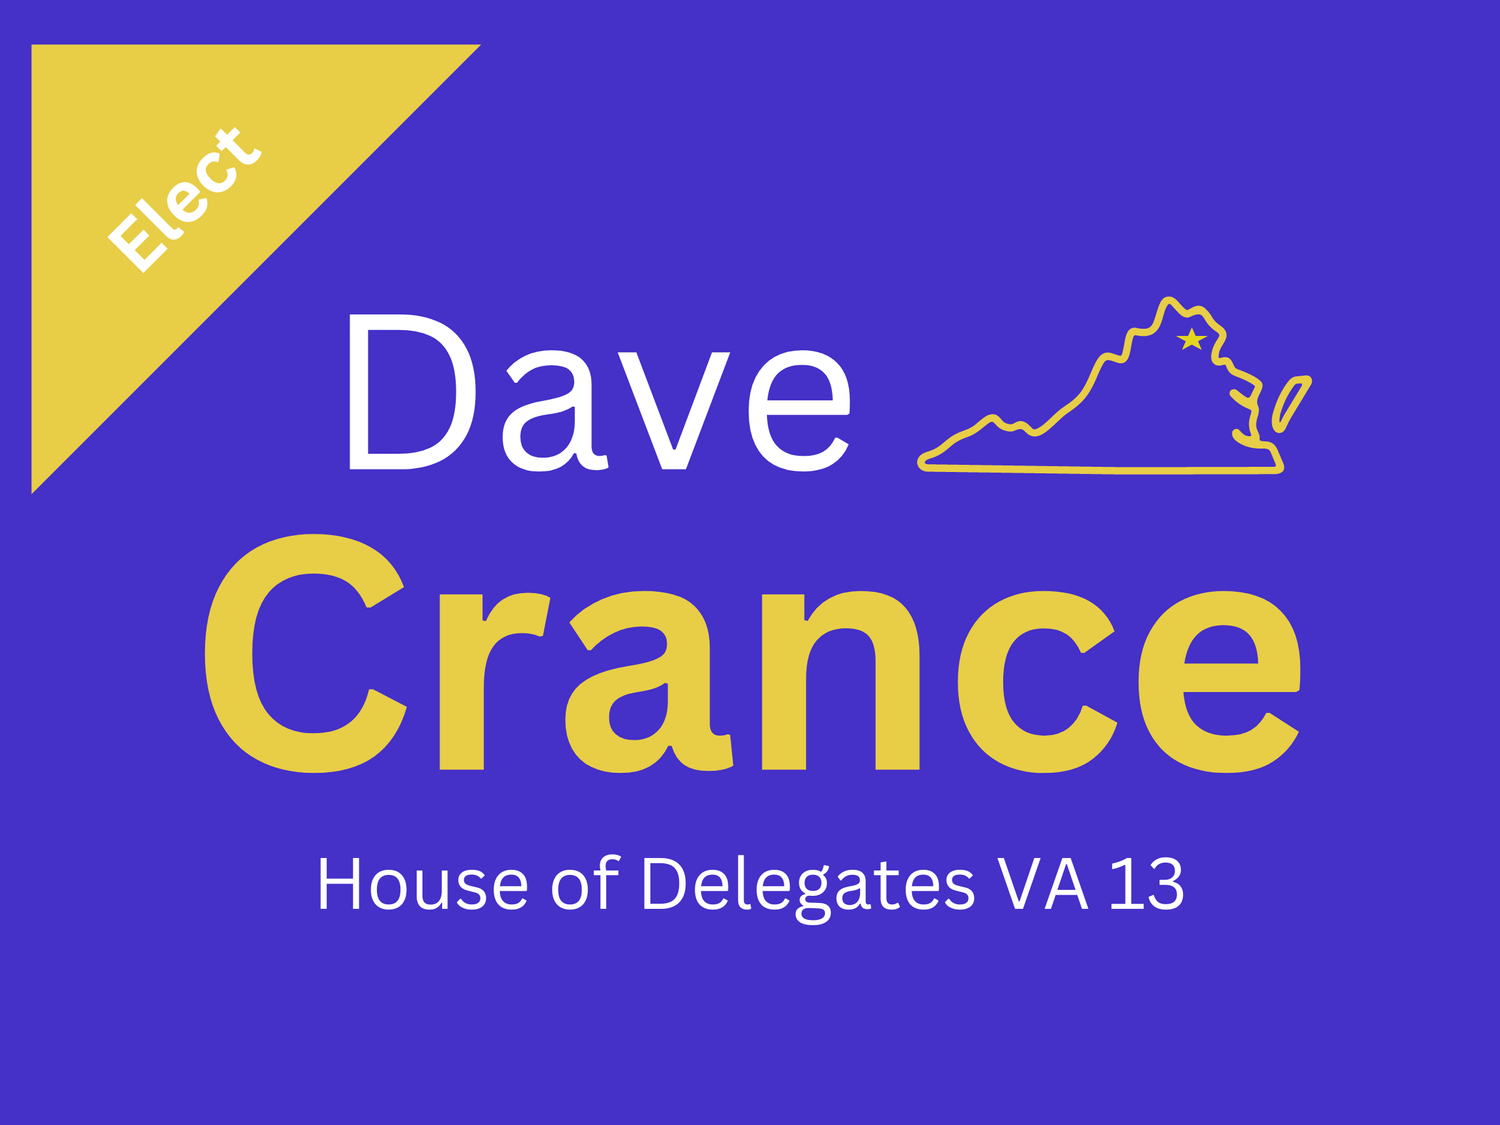 Dave Crance for 13th Delegate of Virginia